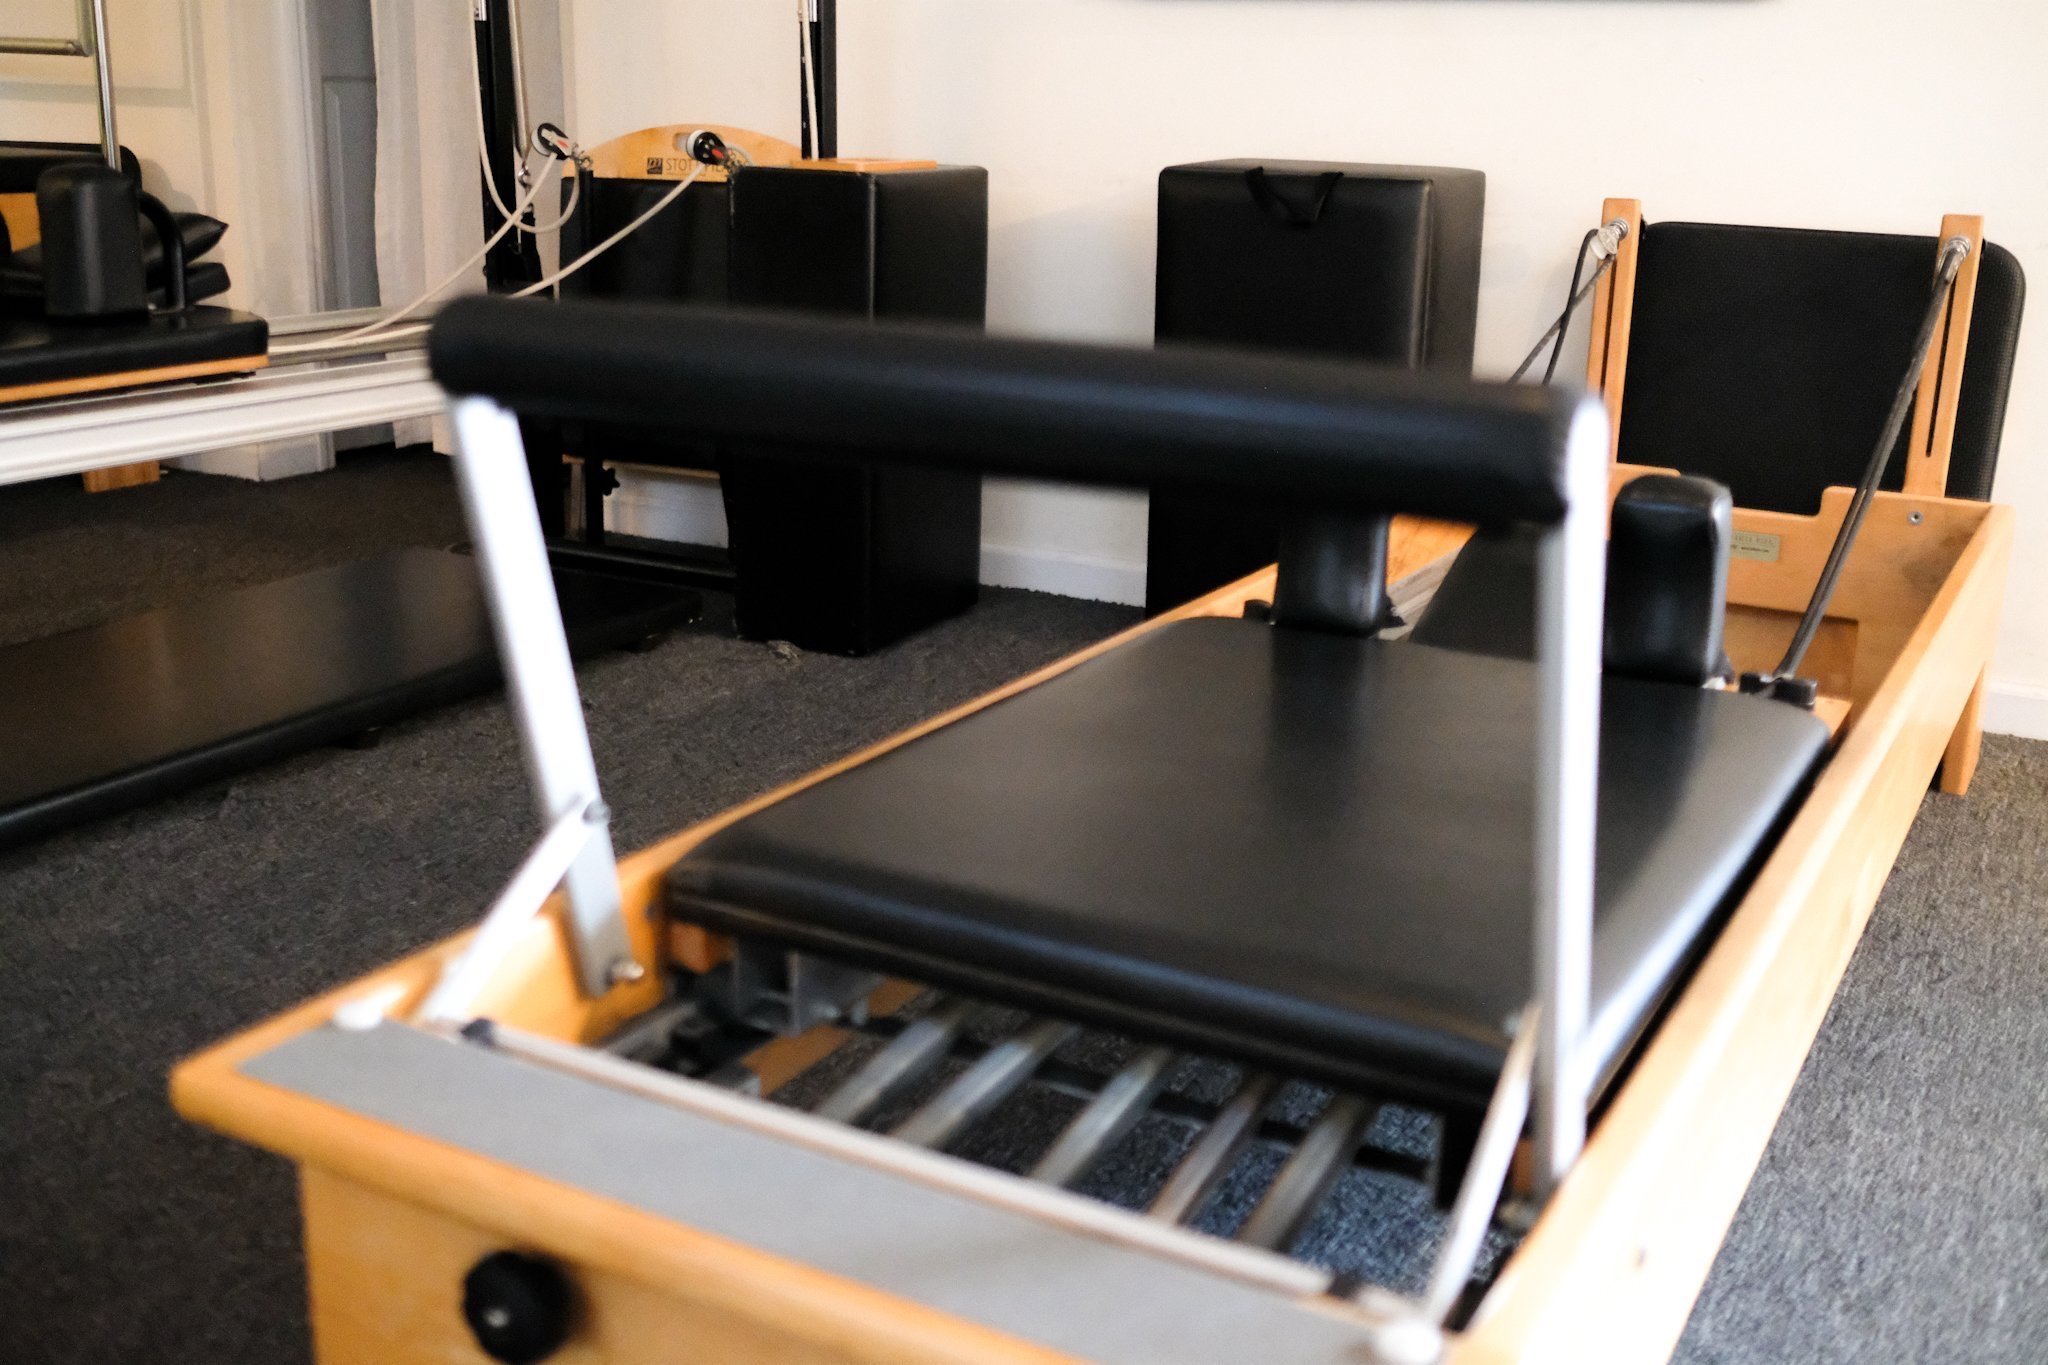  The Pilates reformer is the cornerstone of our Pilates classes. Its unique design features a sliding carriage, springs, and straps that provide resistance, helping to strengthen and tone muscles. The reformer allows for a wide range of exercises tha